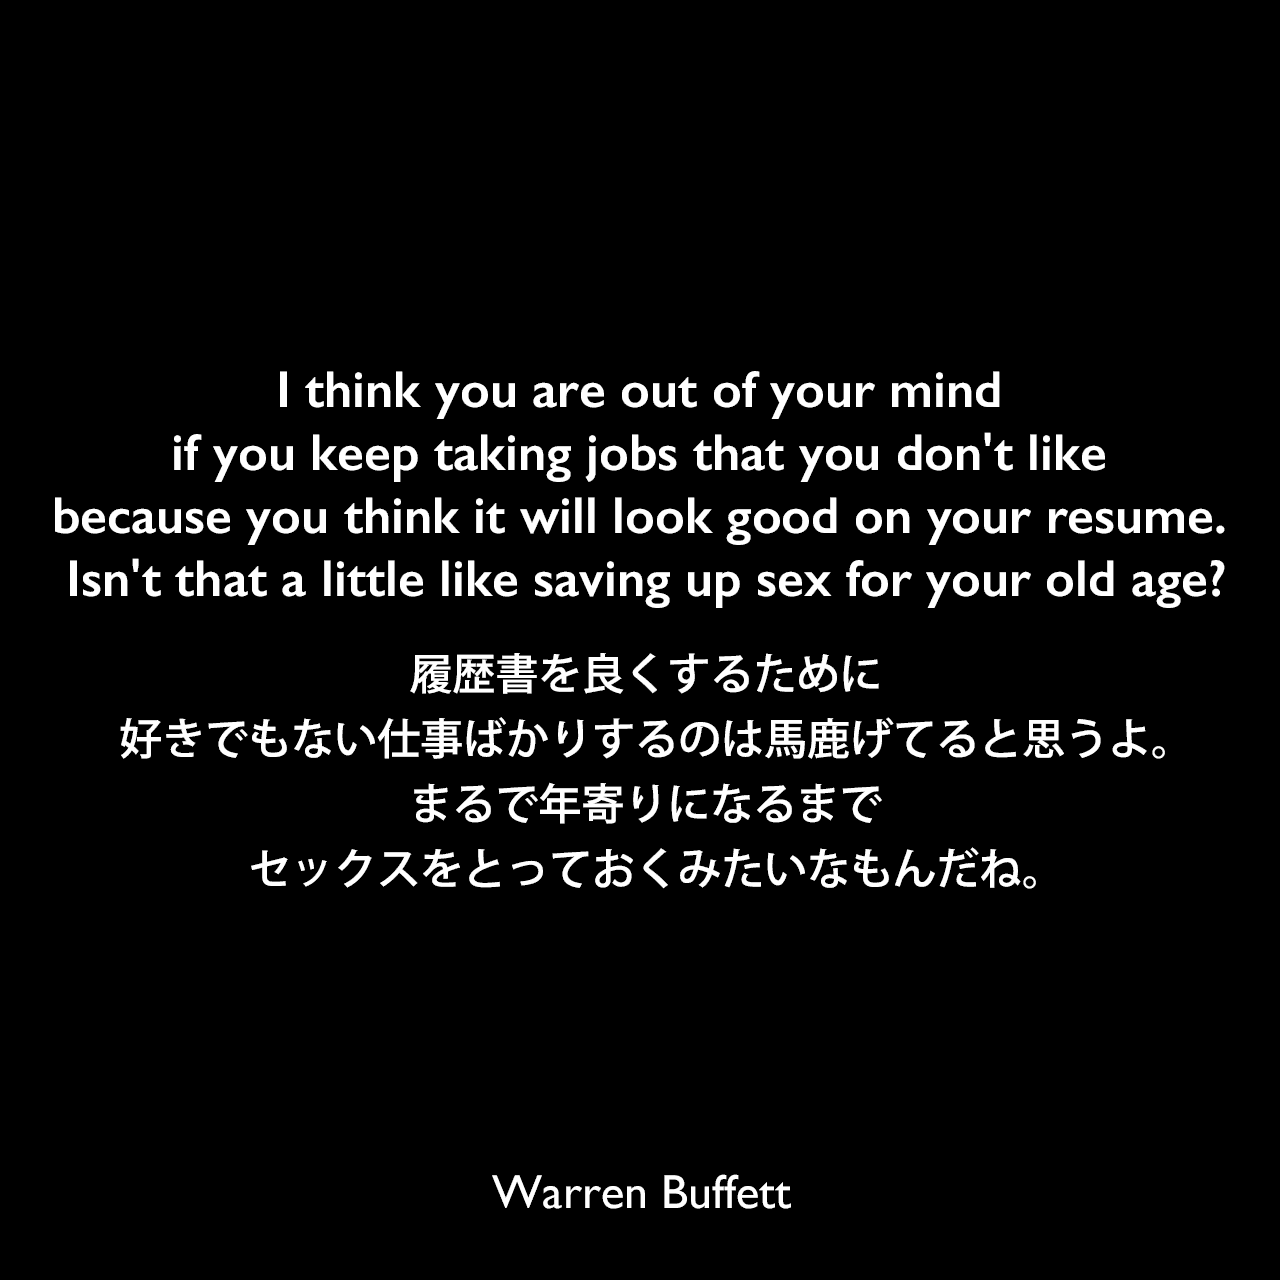 I think you are out of your mind if you keep taking jobs that you don't like because you think it will look good on your resume. Isn't that a little like saving up sex for your old age?履歴書を良くするために好きでもない仕事ばかりするのは馬鹿げてると思うよ。まるで年寄りになるまでセックスをとっておくみたいなもんだね。Warren Buffett